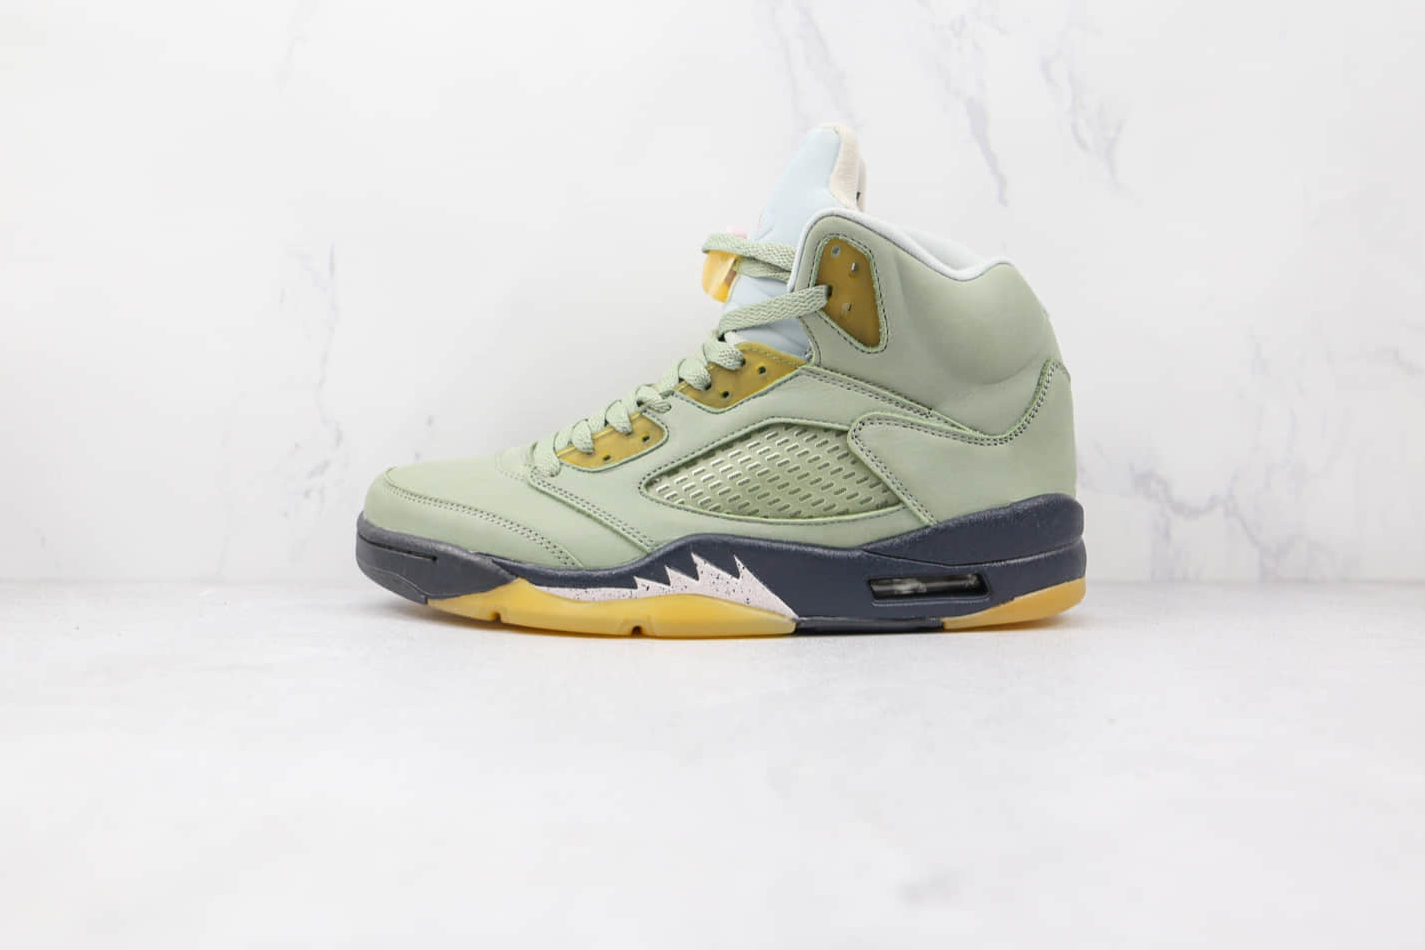 Air Jordan 5 Retro 'Jade Horizon' DC7501-300: Elevate Your Style with this Iconic Sneaker